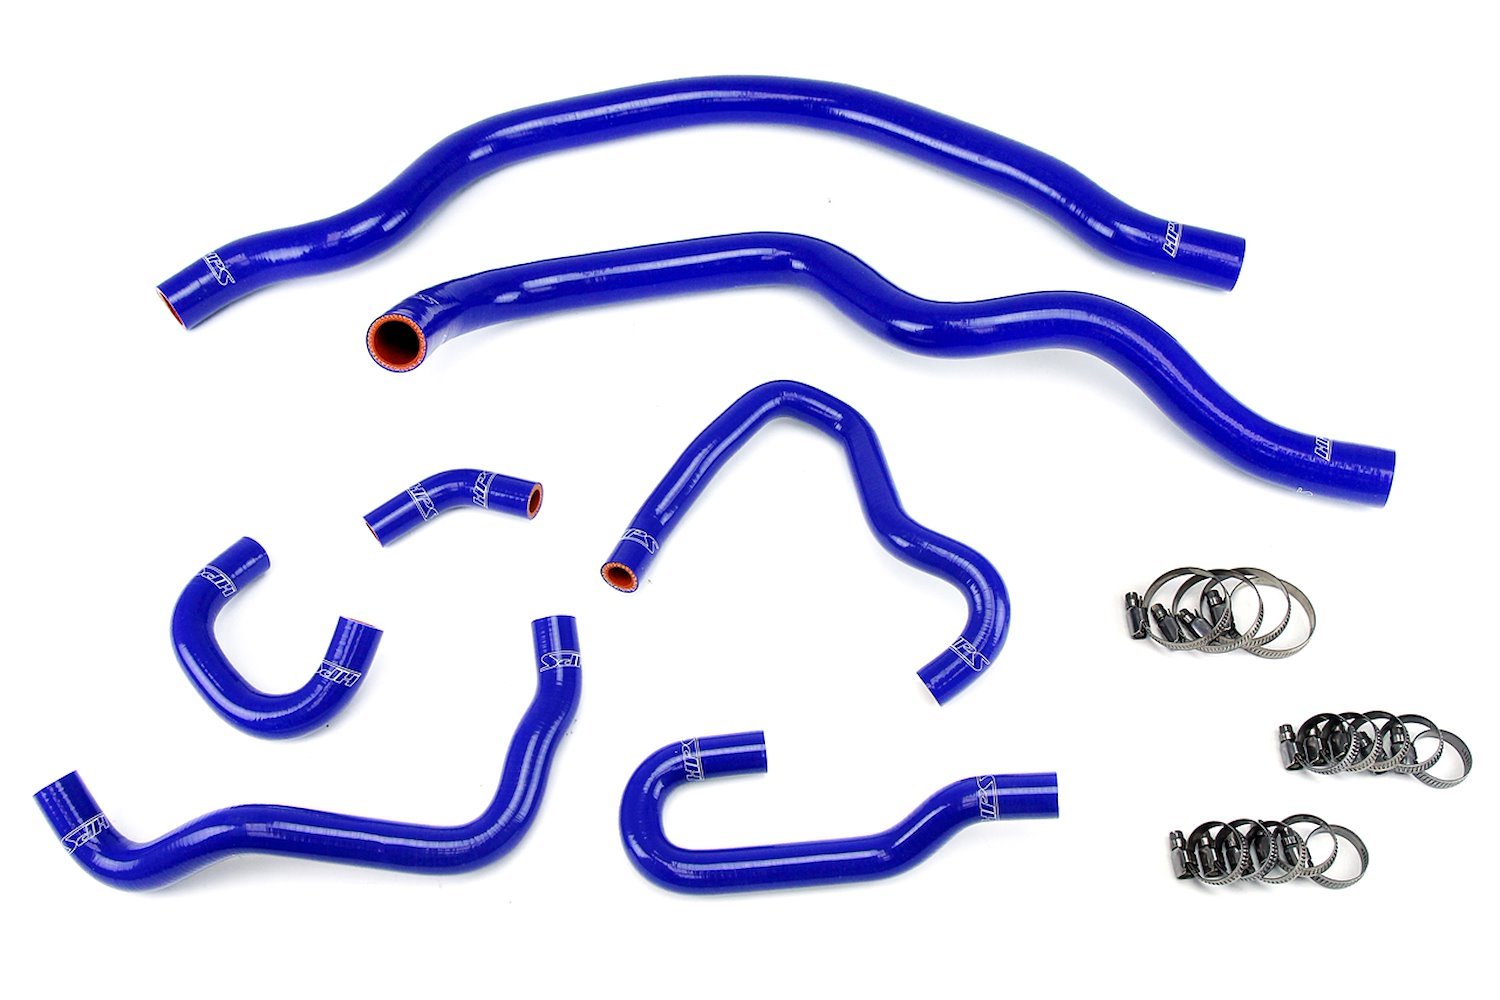 57-1489-BLUE Coolant Hose Kit, High-Temp 3-Ply Reinforced Silicone, Replace Rubber Radiator Heater Coolant Hoses